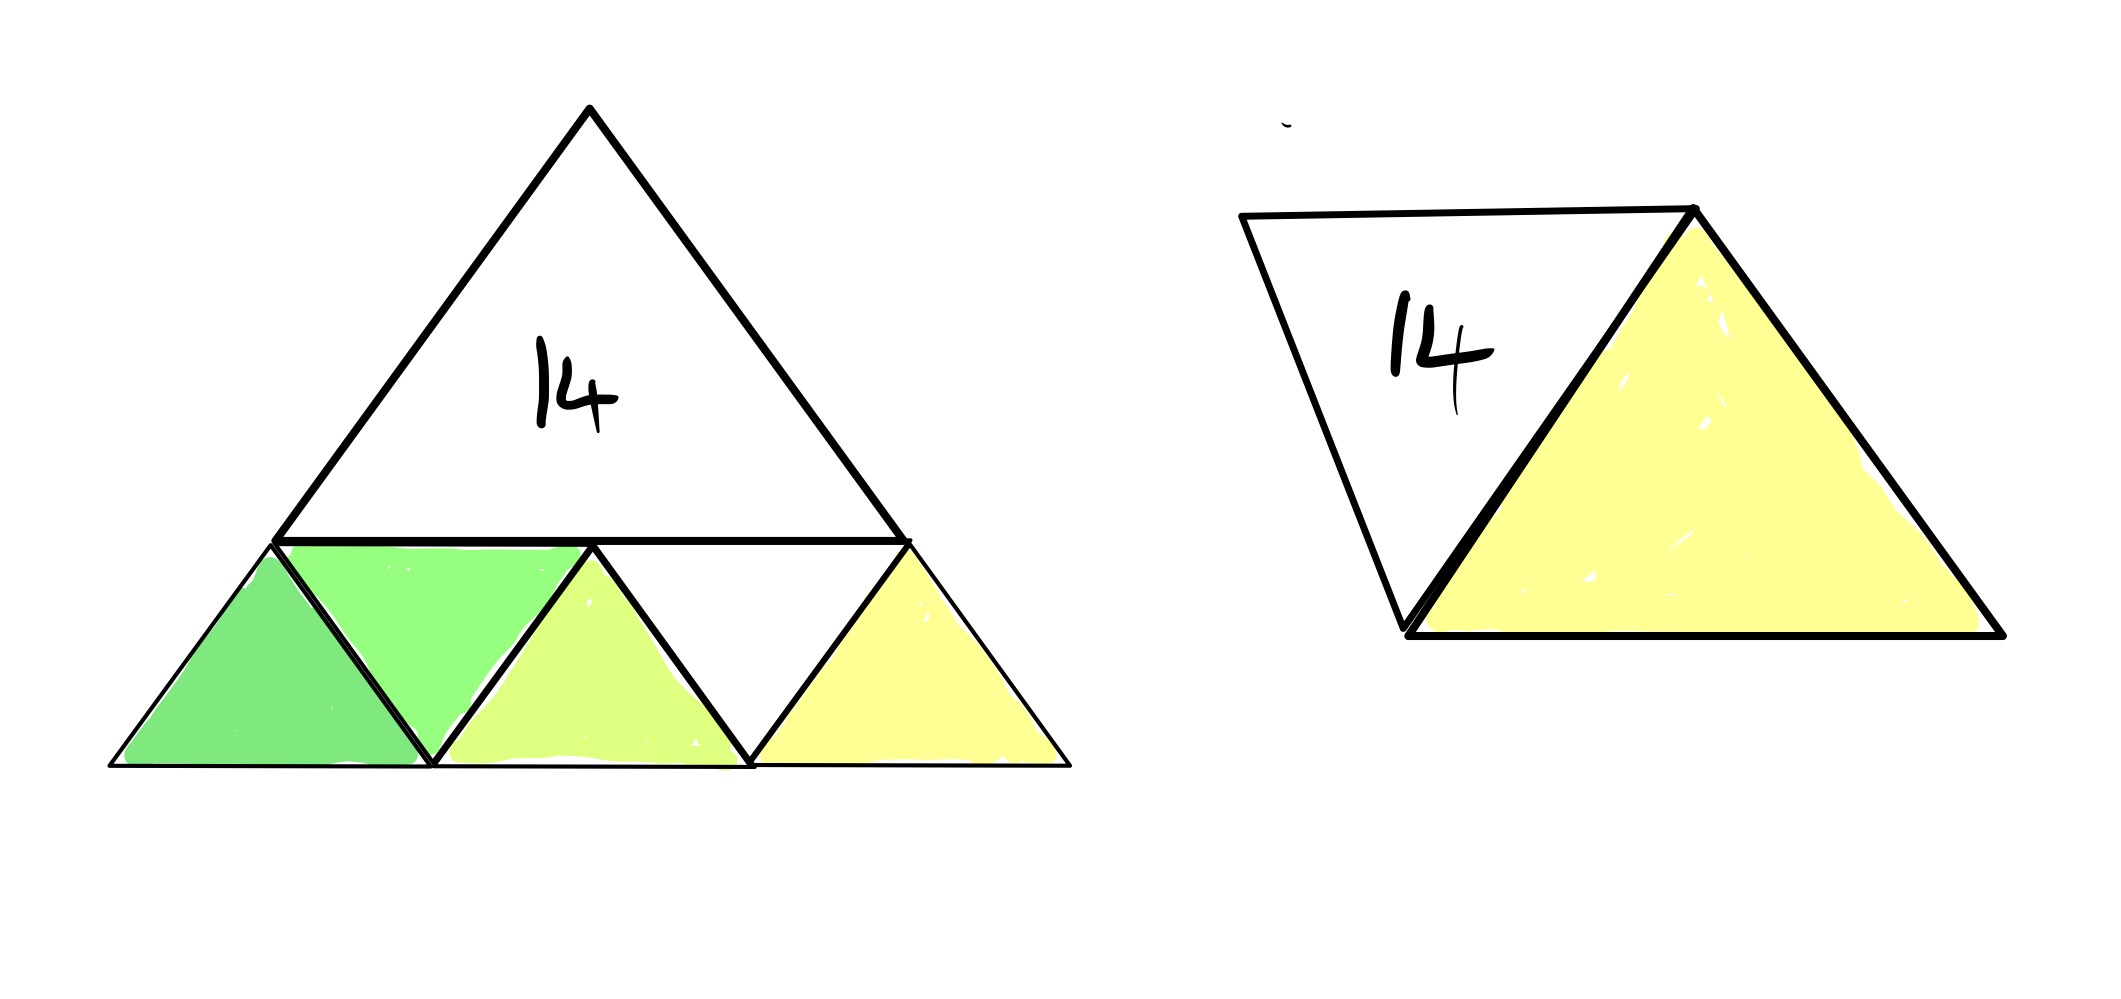 Five equilateral triangles extreme versions